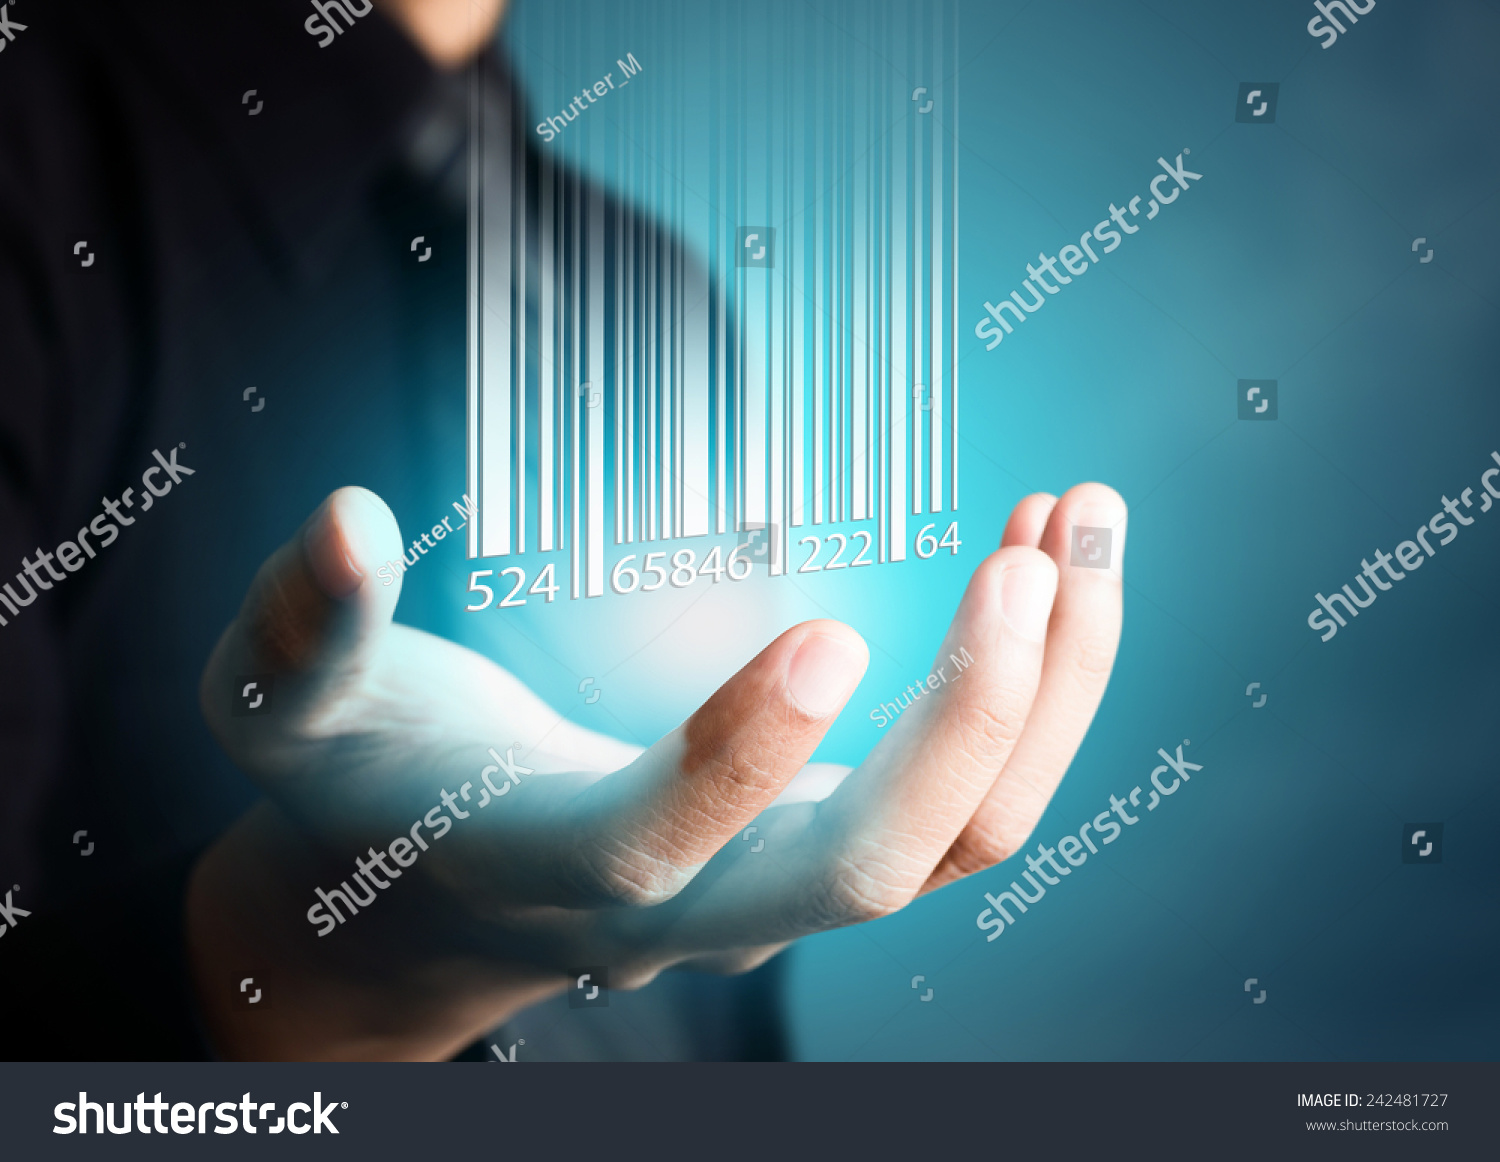 Barcode dropping on businessman hand, financial concept #242481727